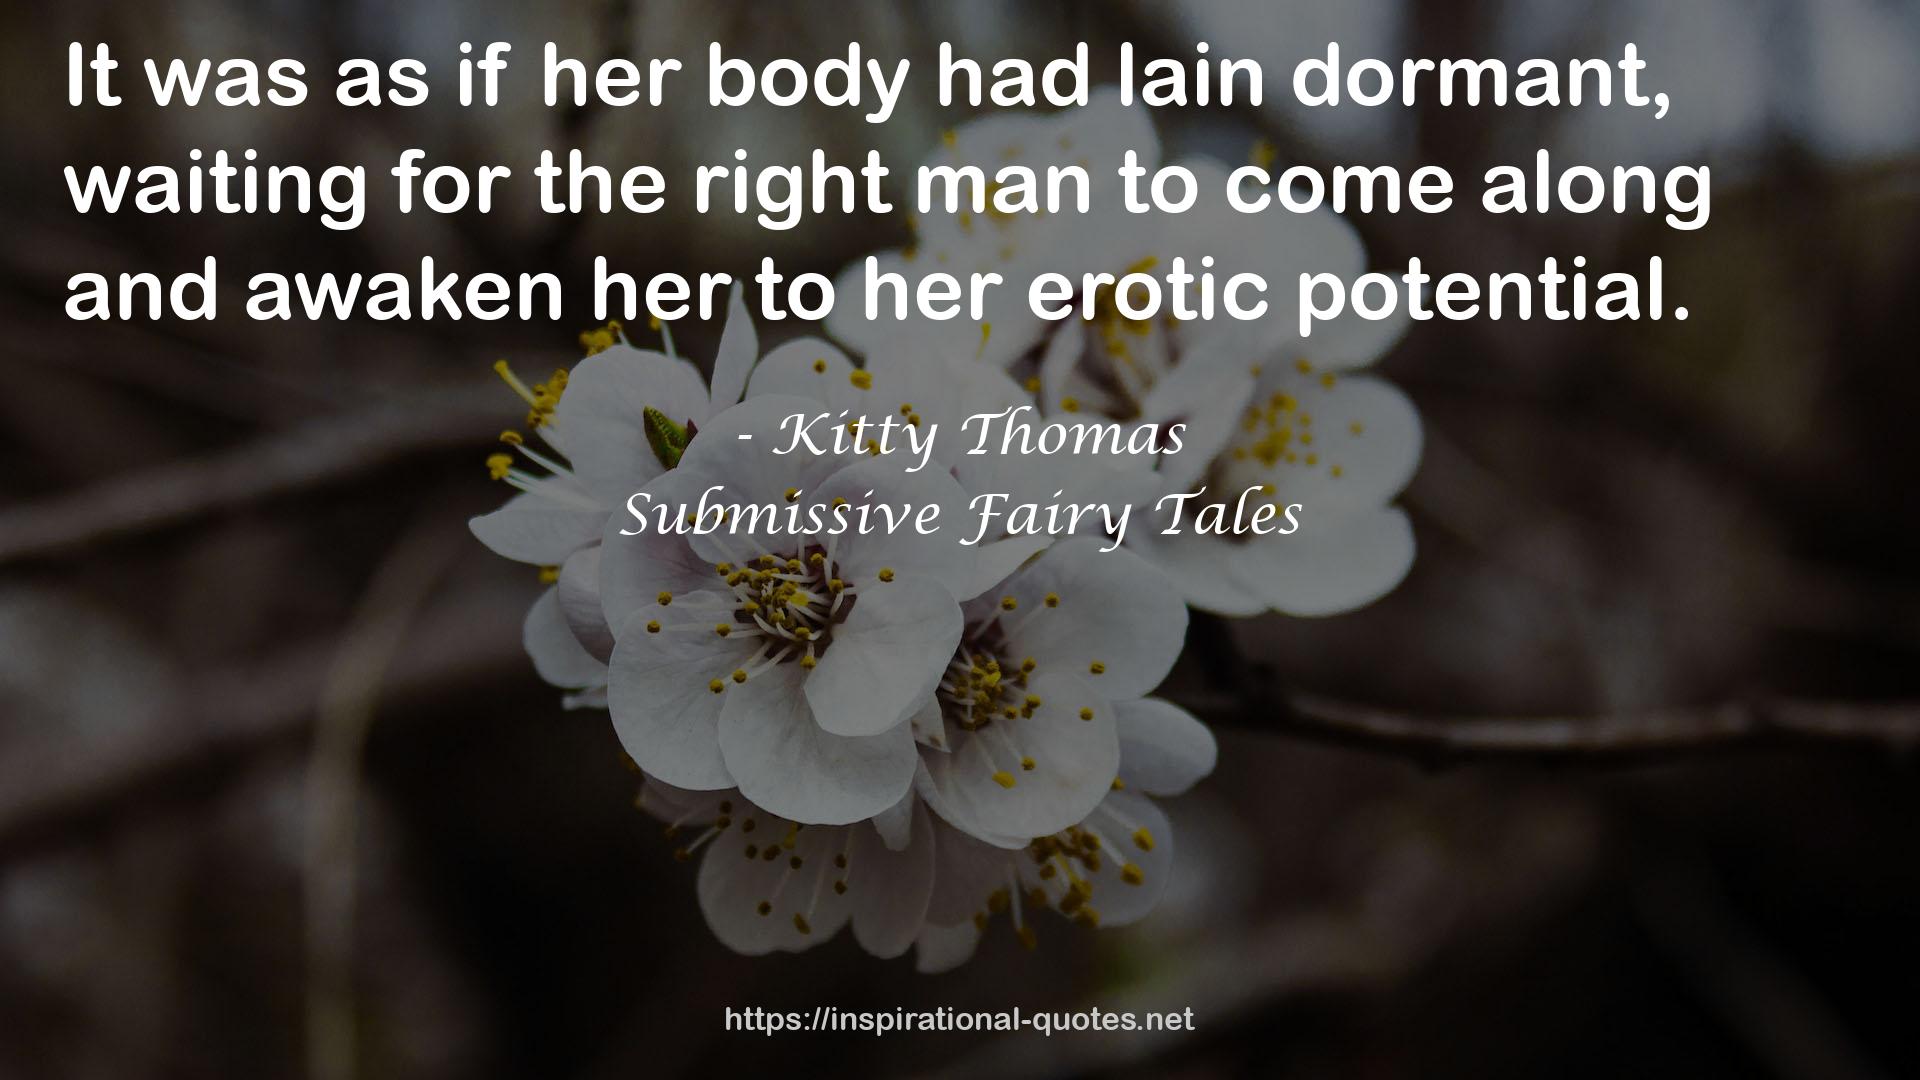 Submissive Fairy Tales QUOTES